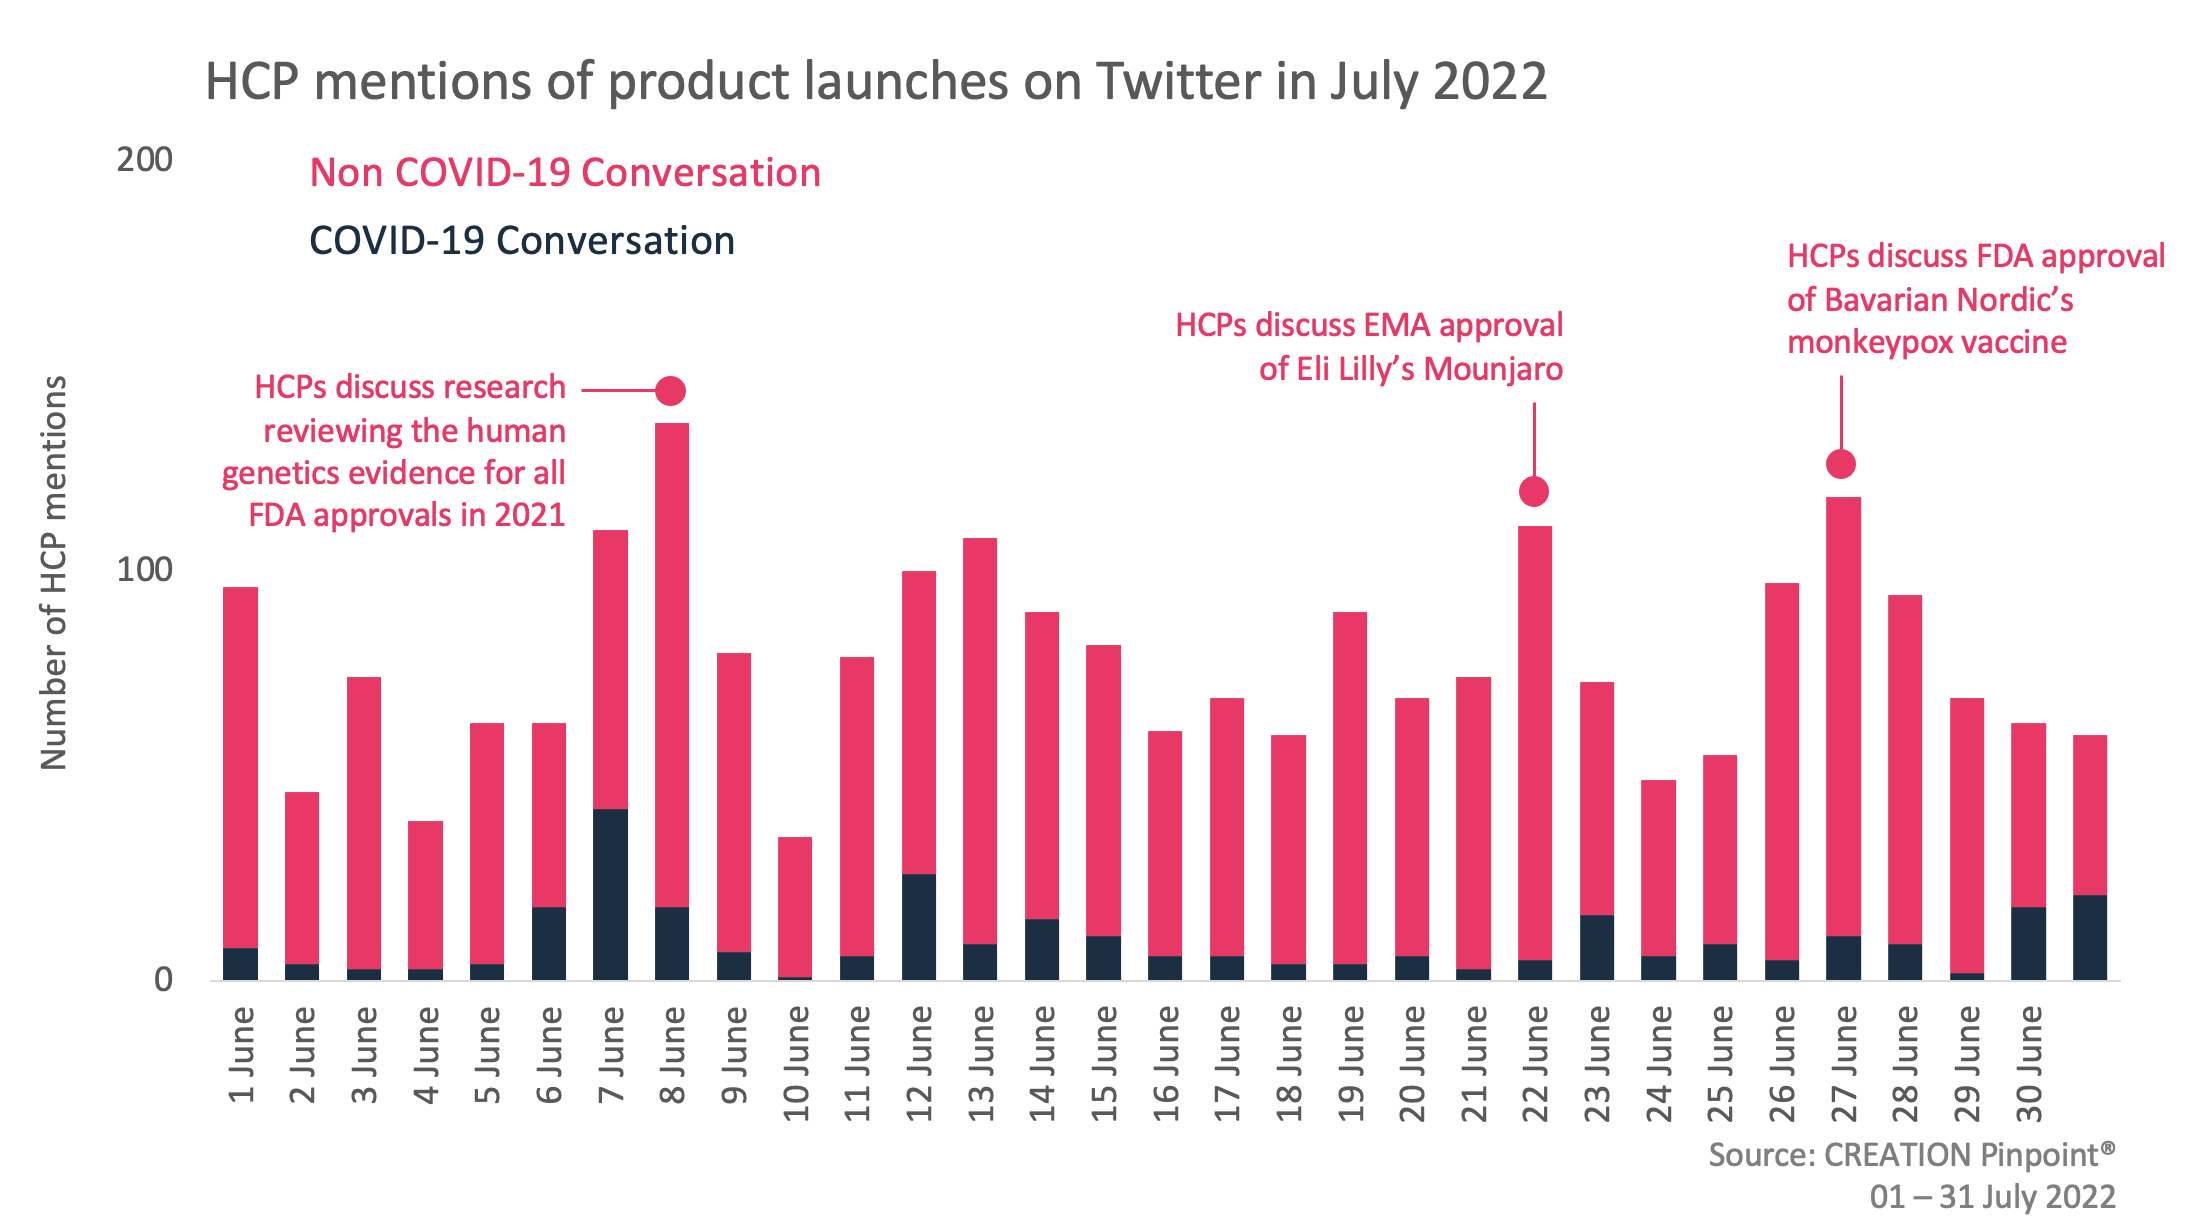 A graph showing HCP mentions of product launches in July 2022